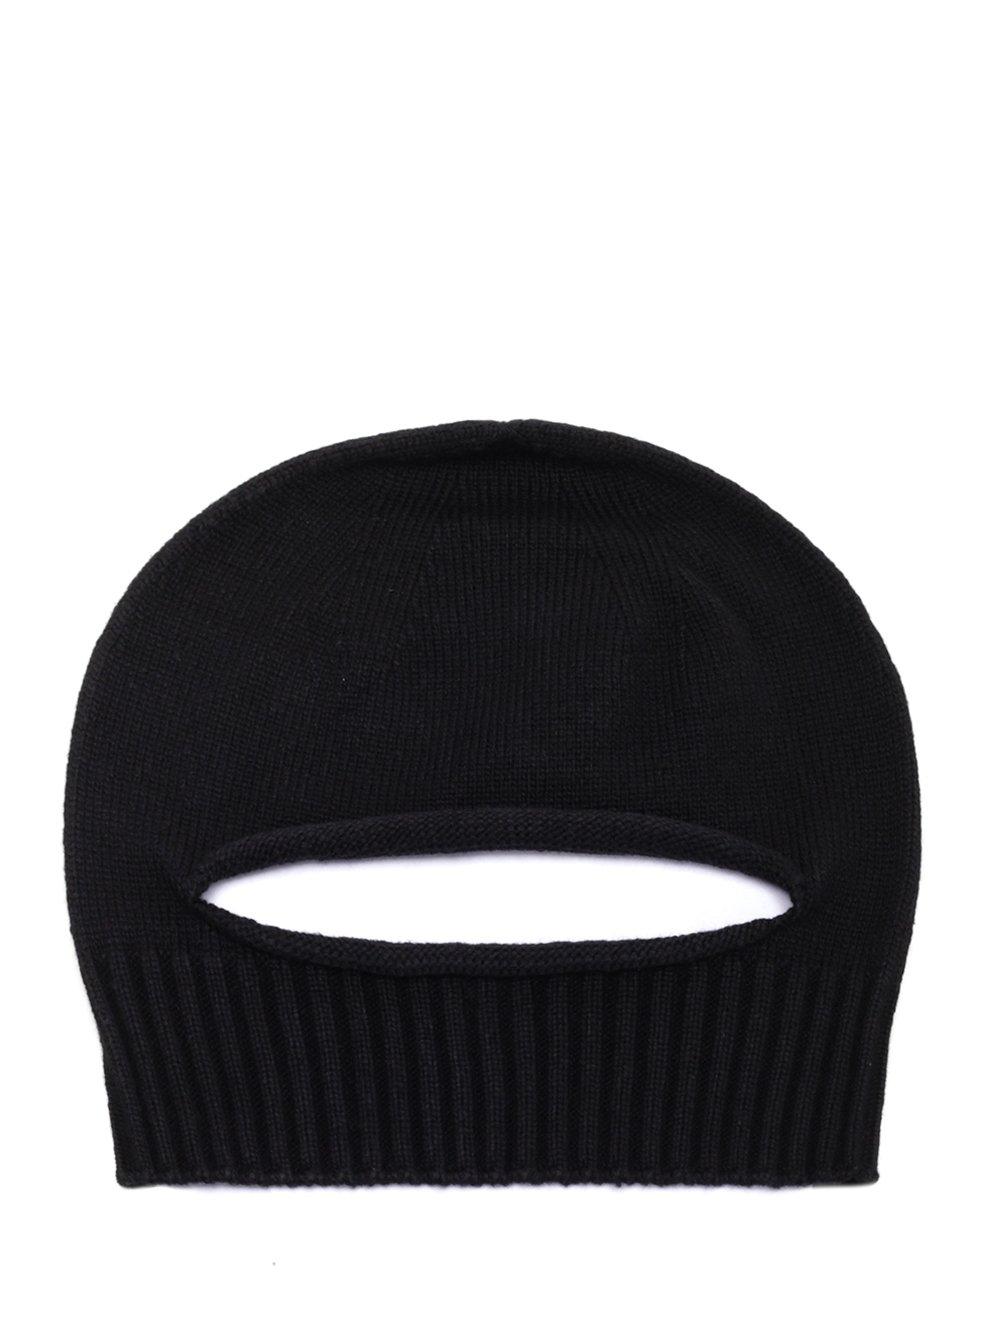 Stone Island Shadow Project Cotton Balaclava Beanie in Black for Men - Lyst